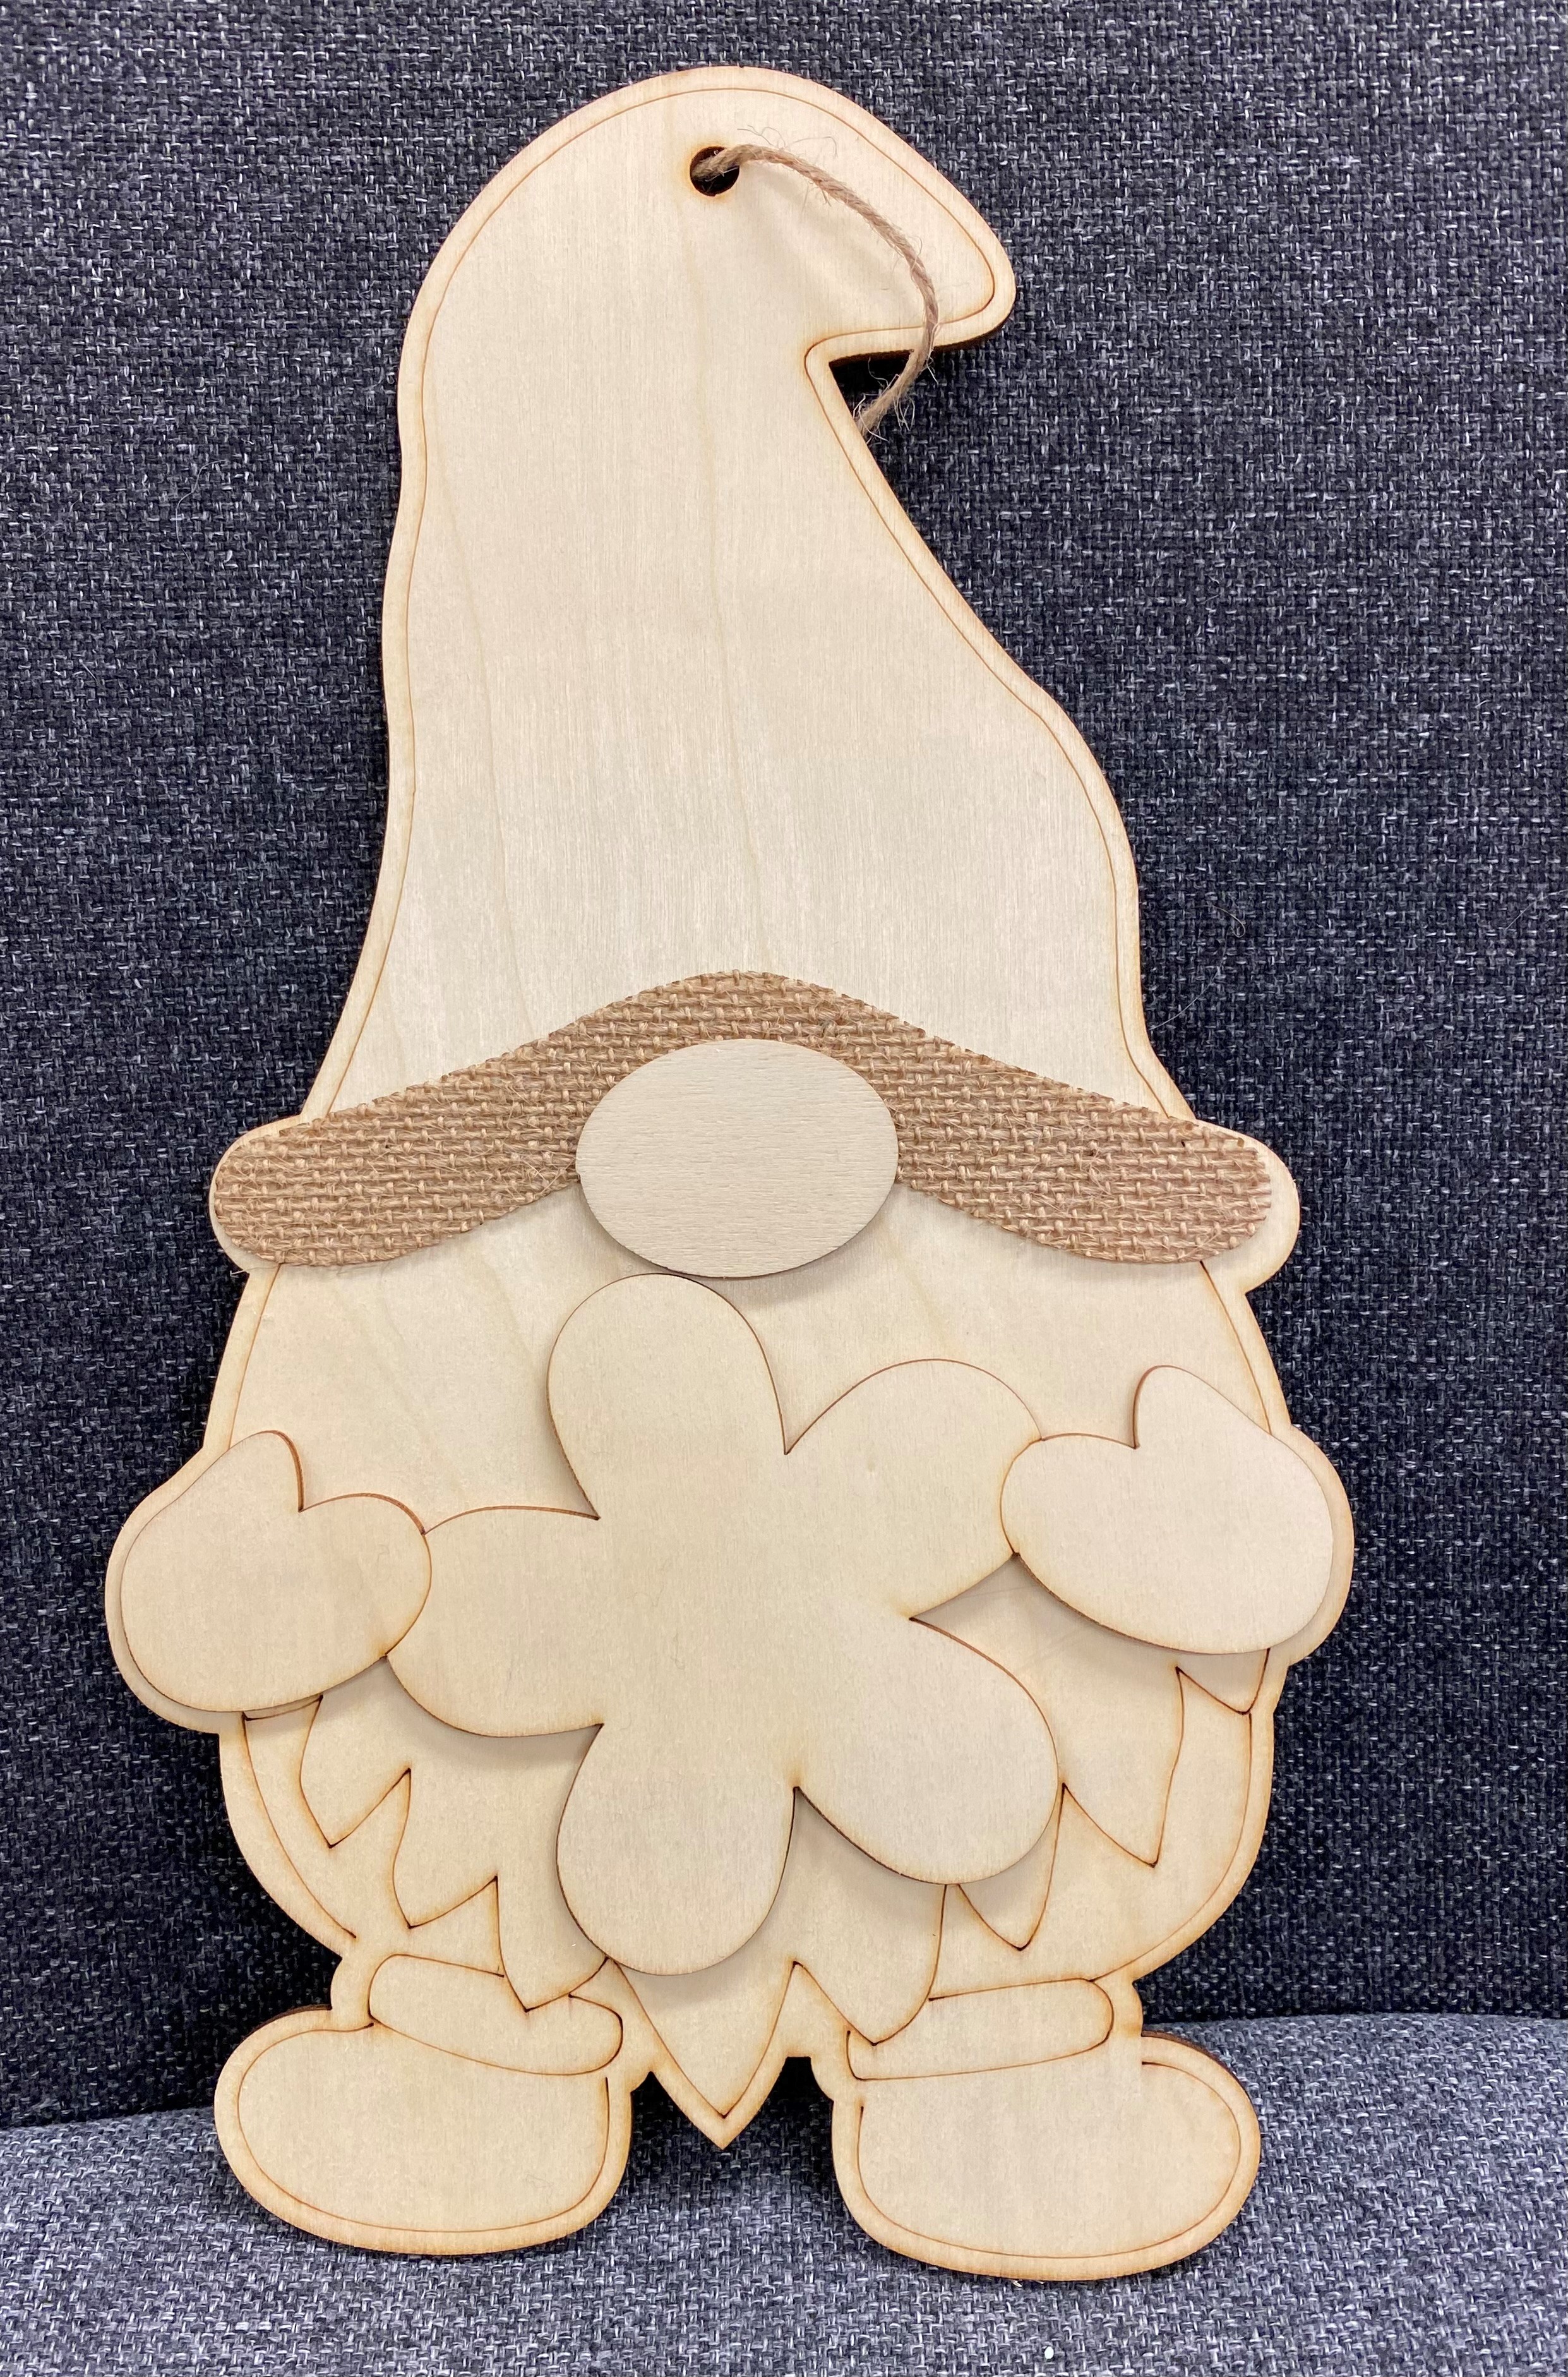 Wood gnome with a flower